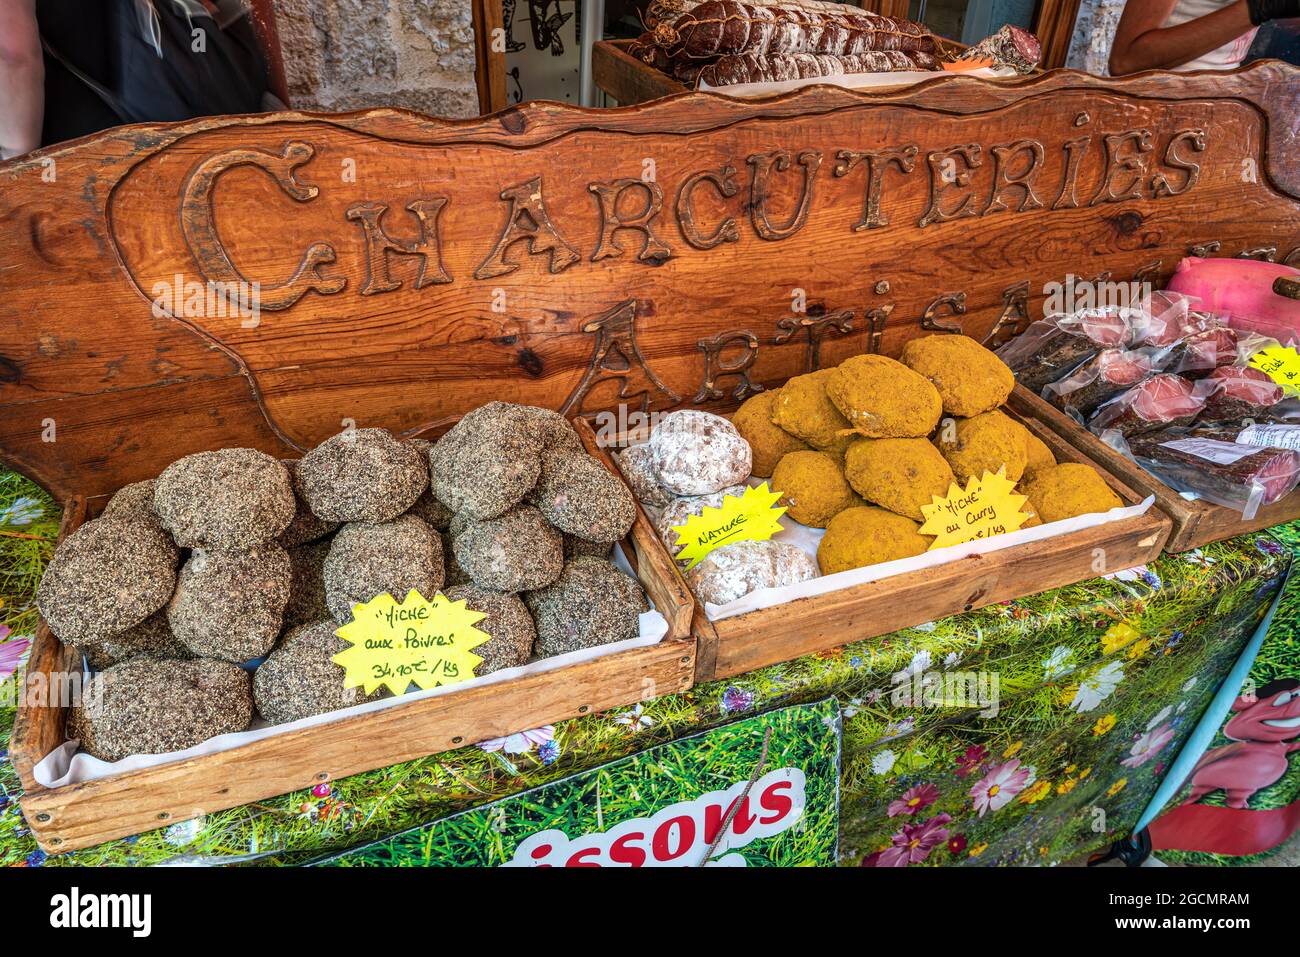 Typical products for sale on the stalls at the Annecy traditional market. Annecy, Savoie department, Auvergne-Rhône-Alpes region, France, Europe Stock Photo